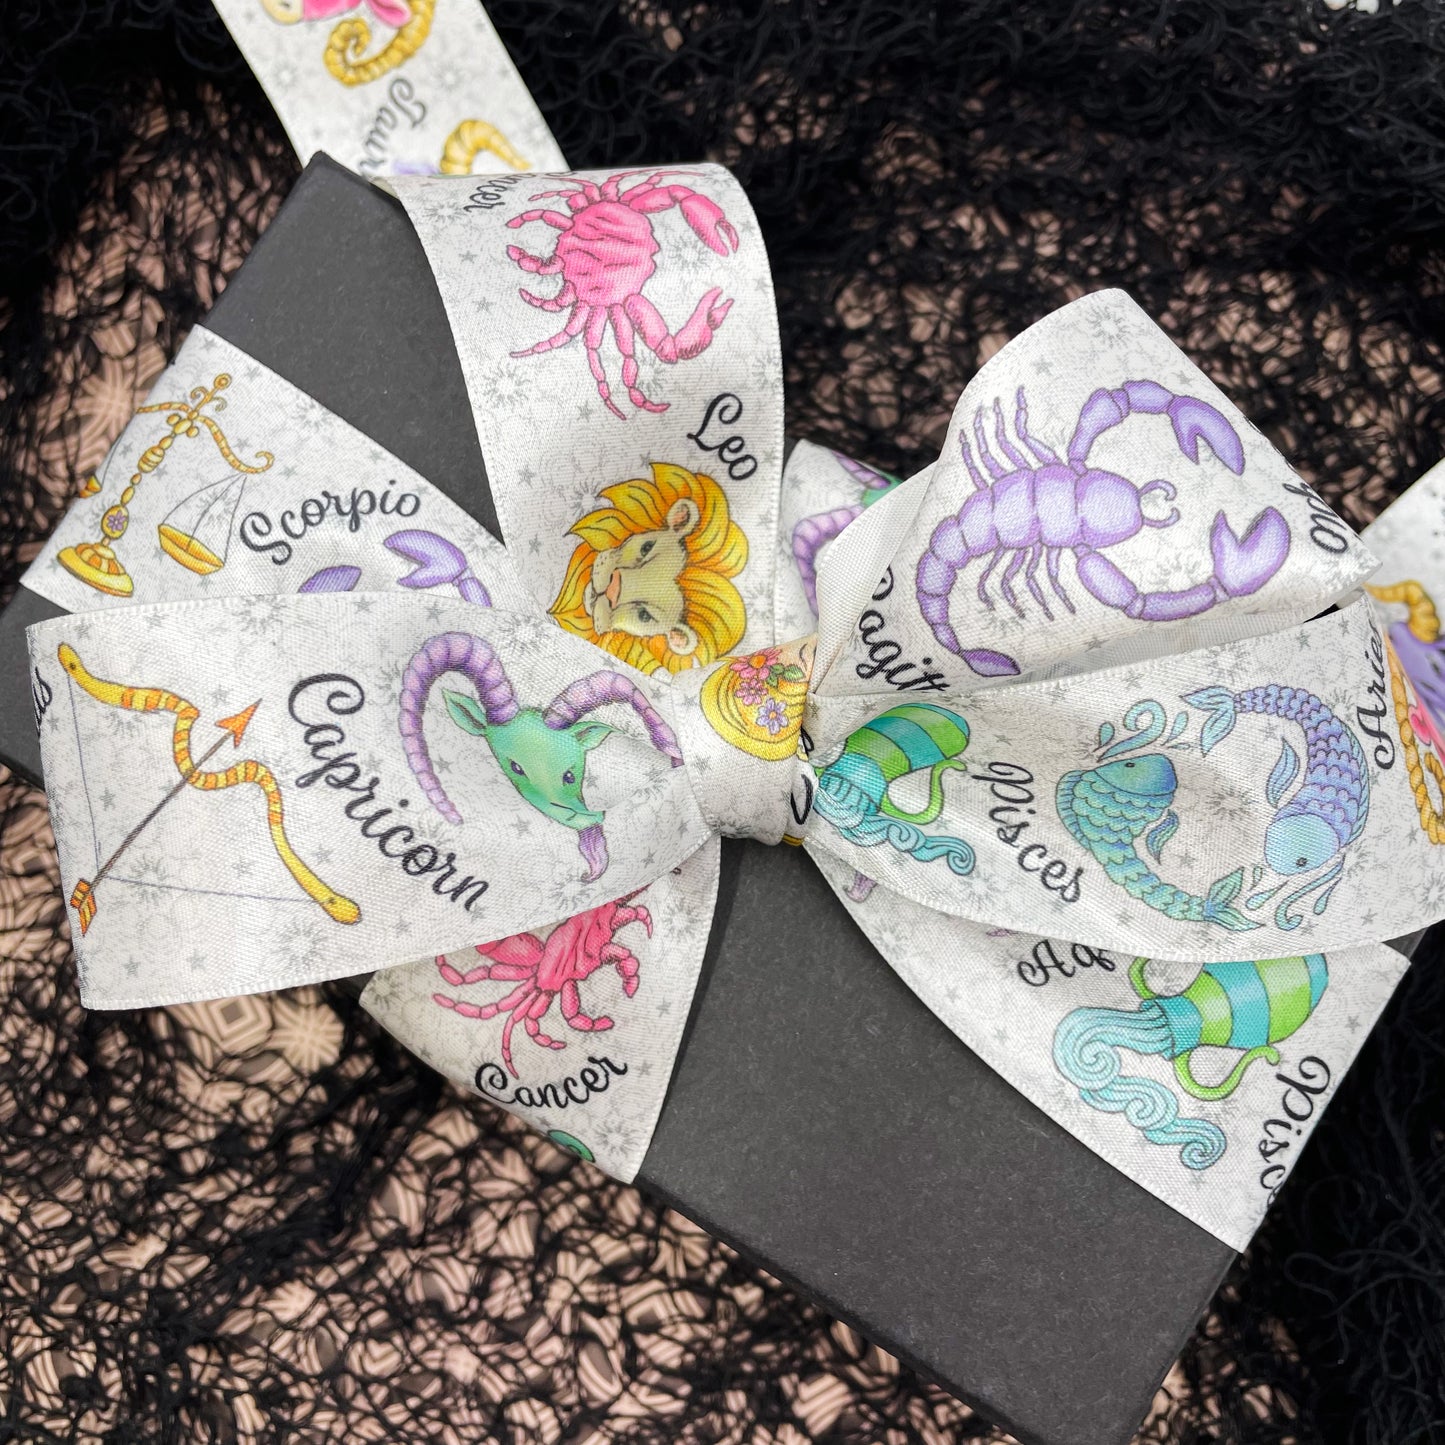 Tie a gorgeous bow on a gift with this truly unique astrology themed ribbon.